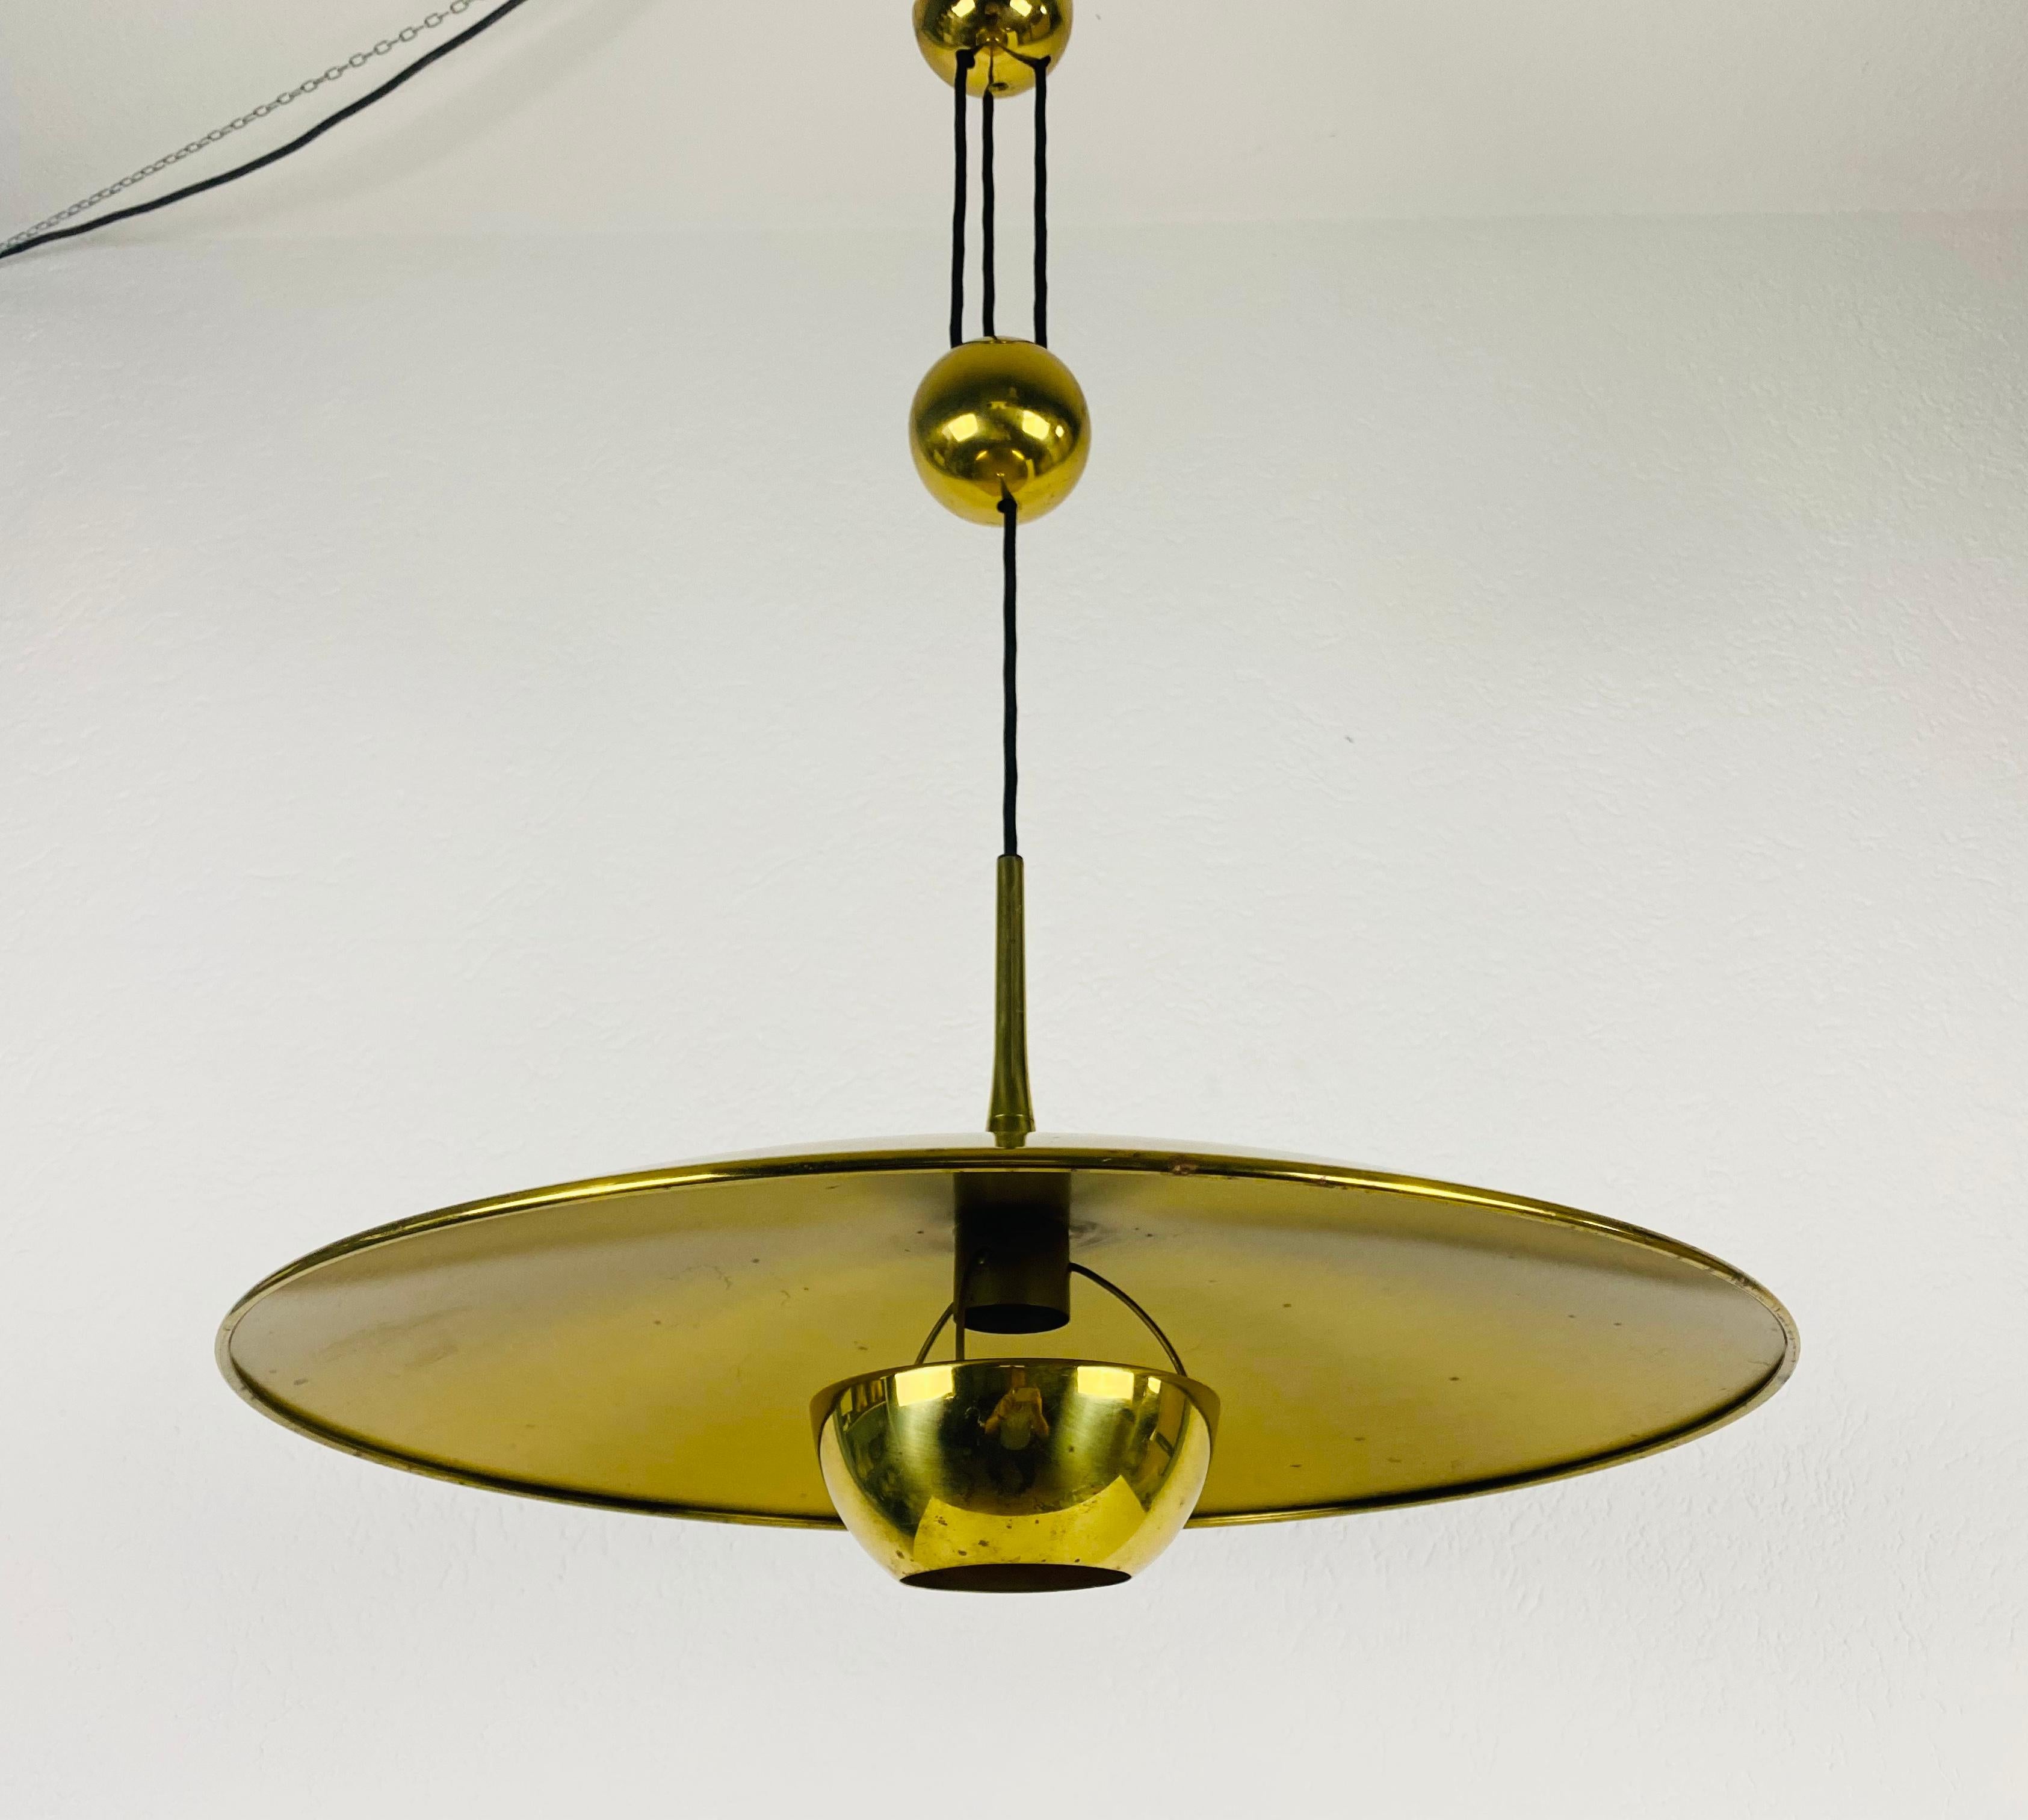 'Onos 55' Brass Pendant Lamp with Counterweight by Florian Schulz, 1970s Germany 6